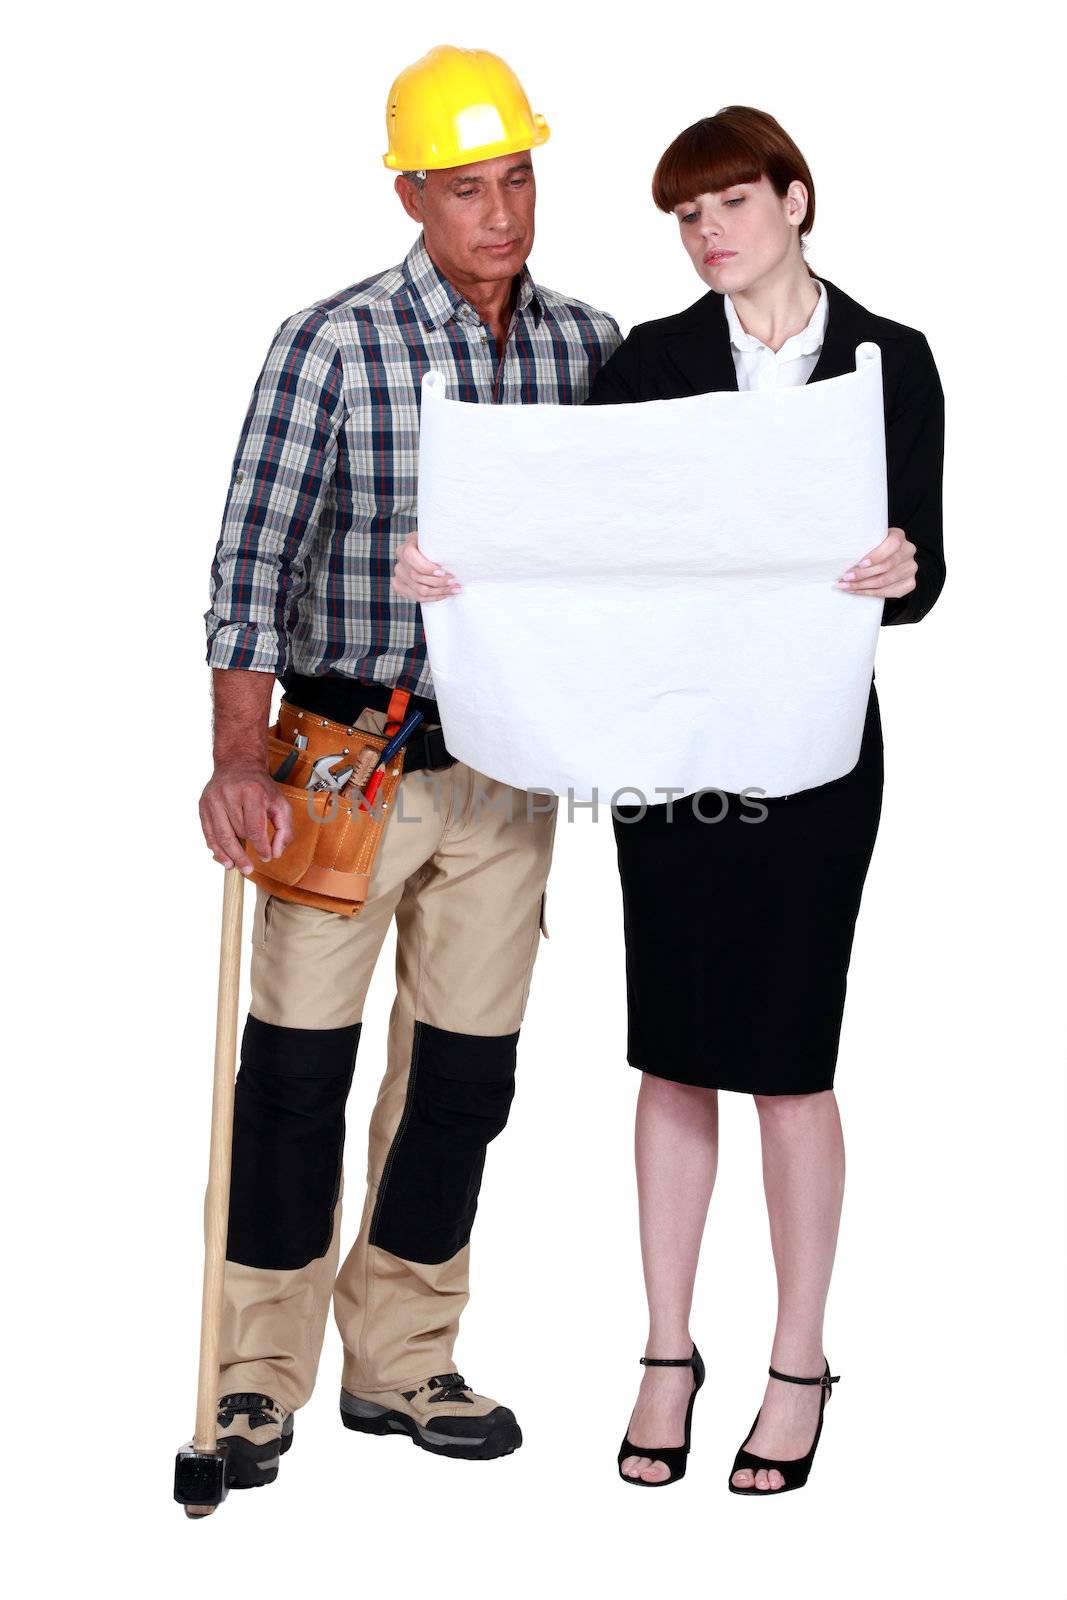 craftsman and businesswoman looking at a blueprint